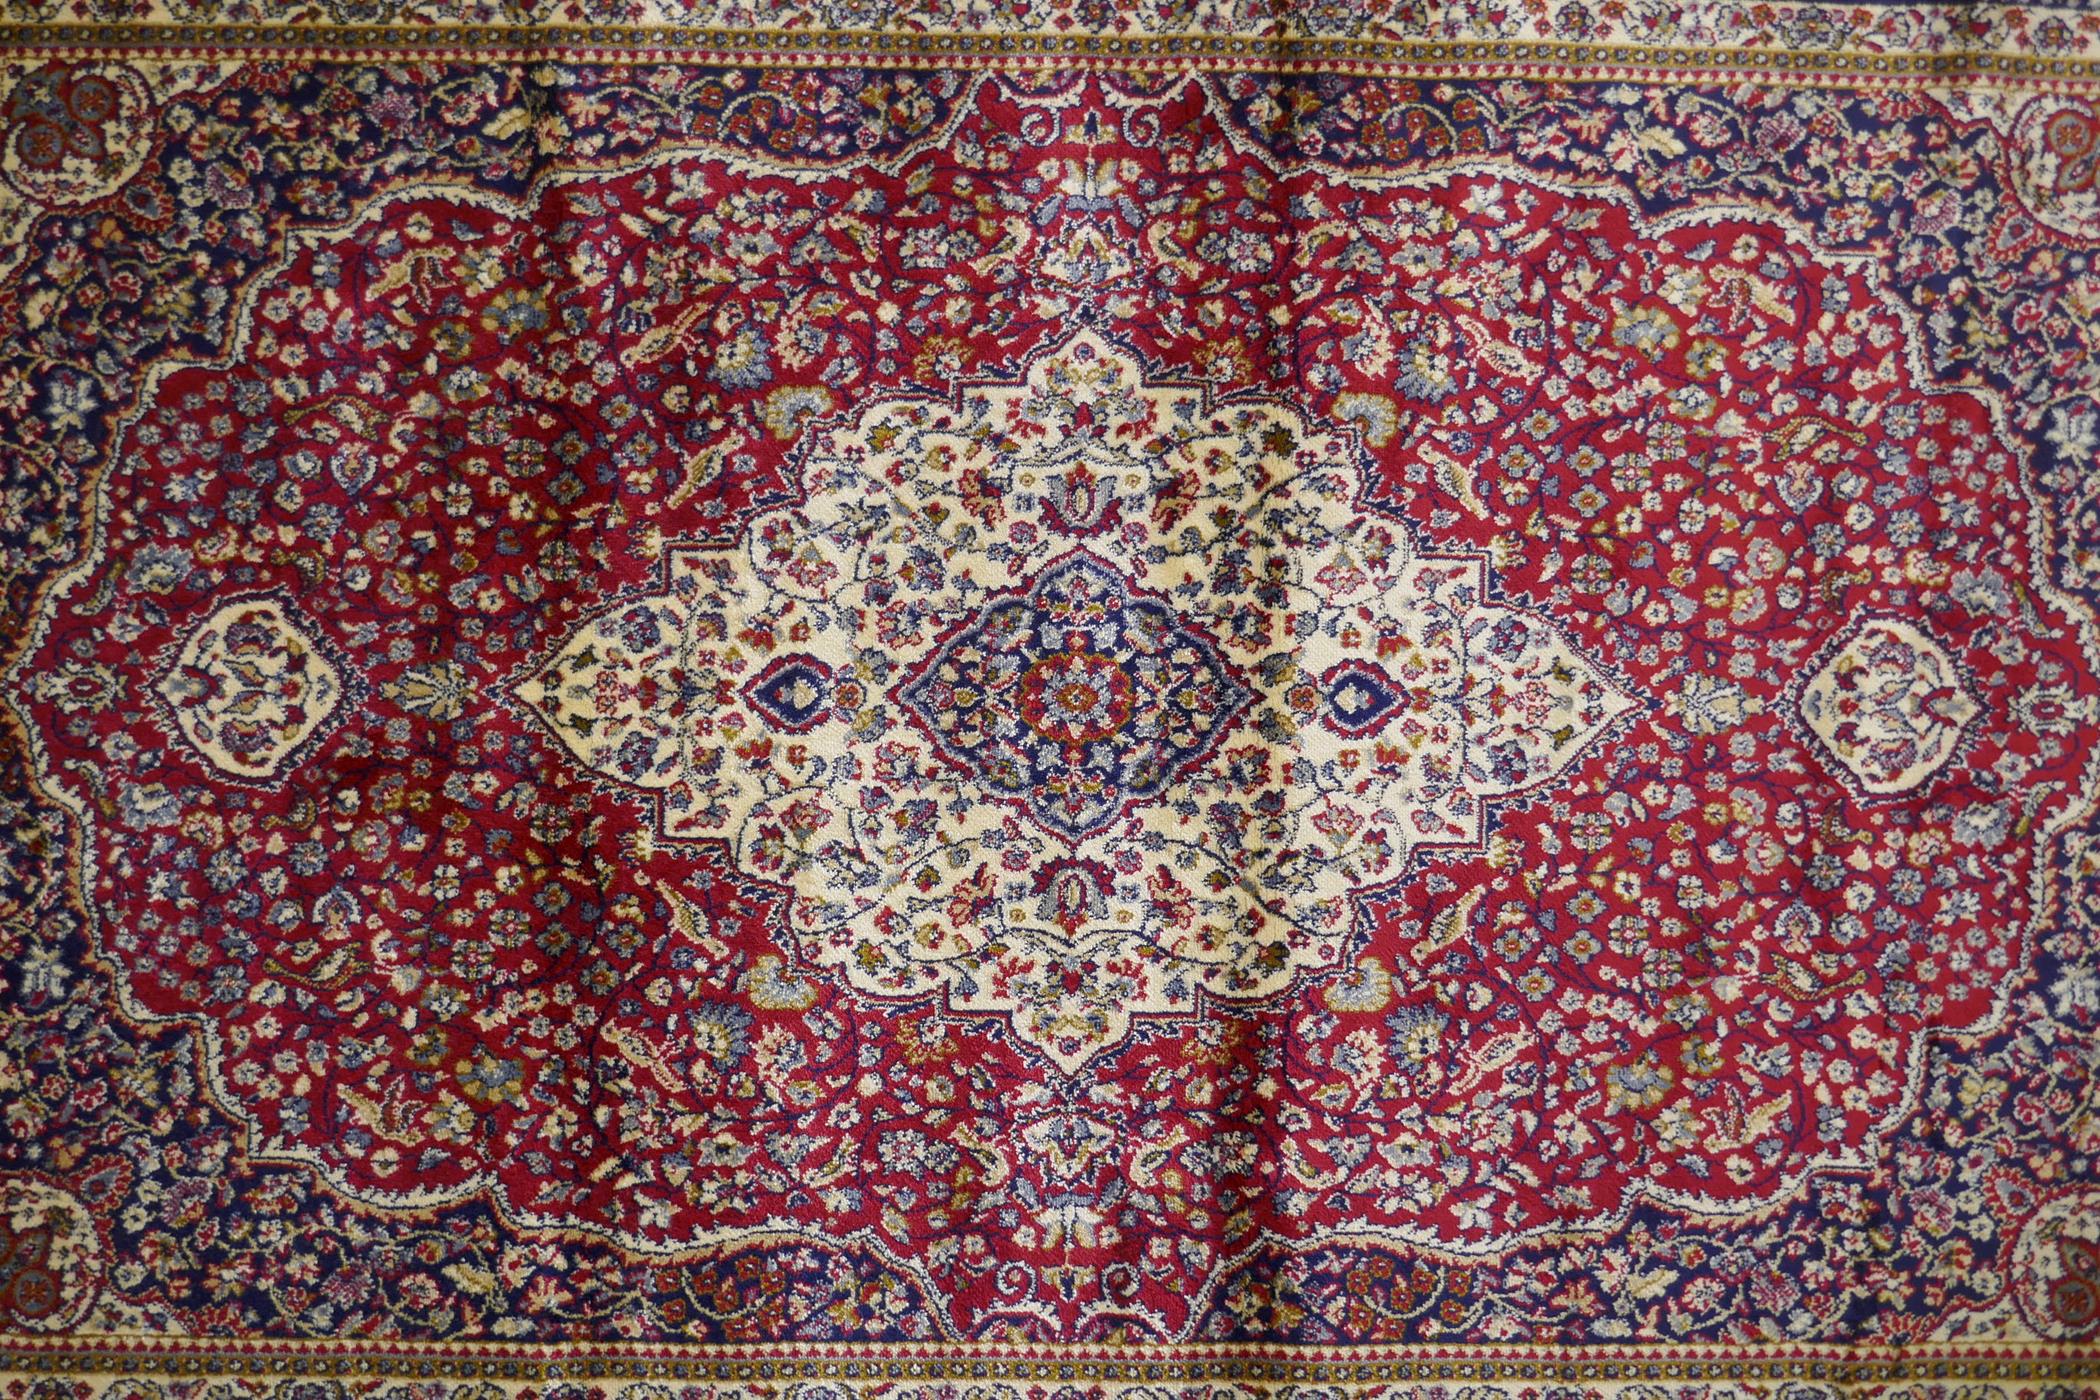 A red ground Kashmir rug with traditional floral medallion design and blue borders, 170 x 120cm - Image 3 of 5